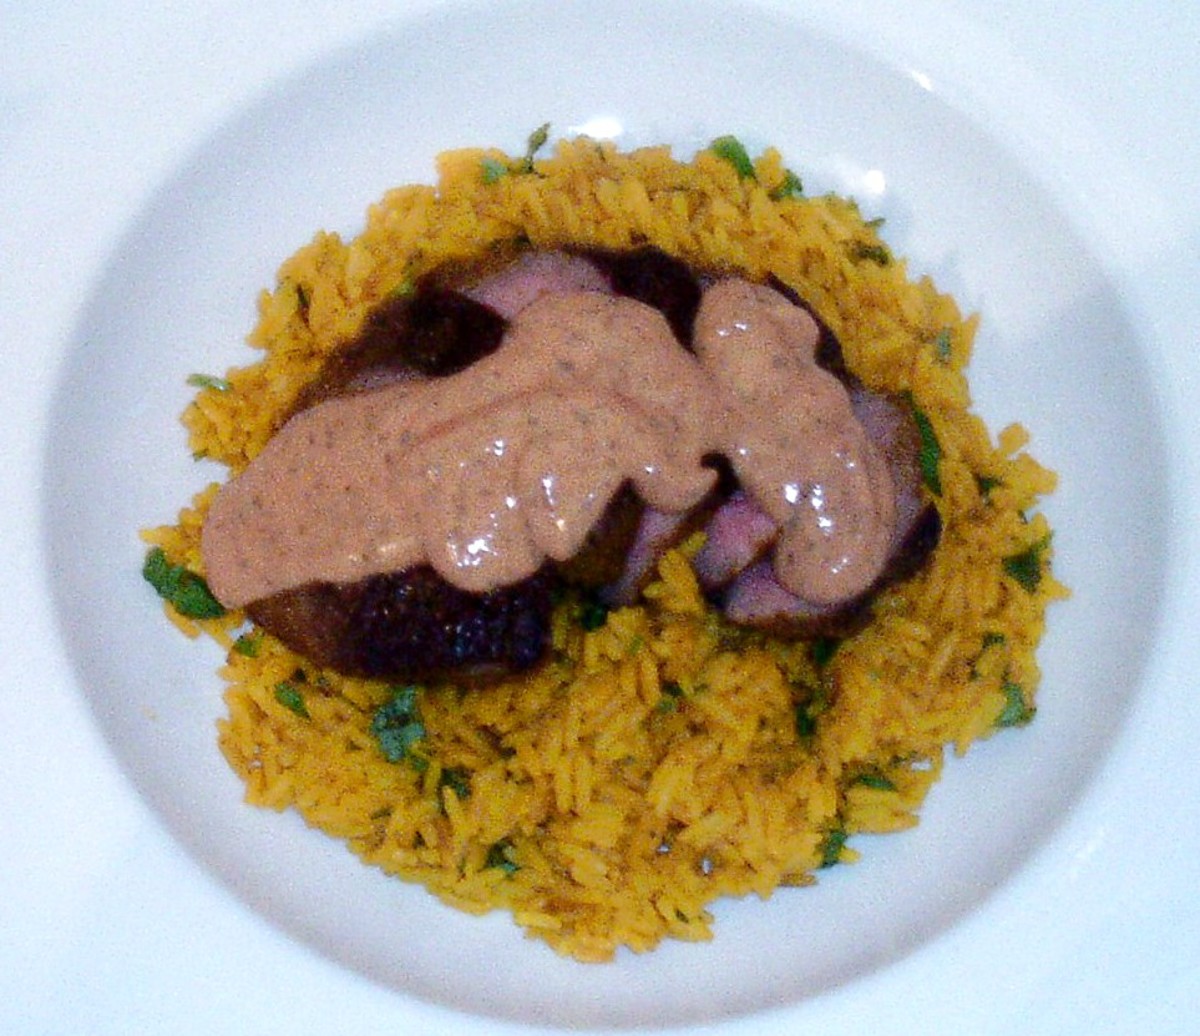 Slices of curried ostrich fillet steak on turmeric rice with spicy sauce